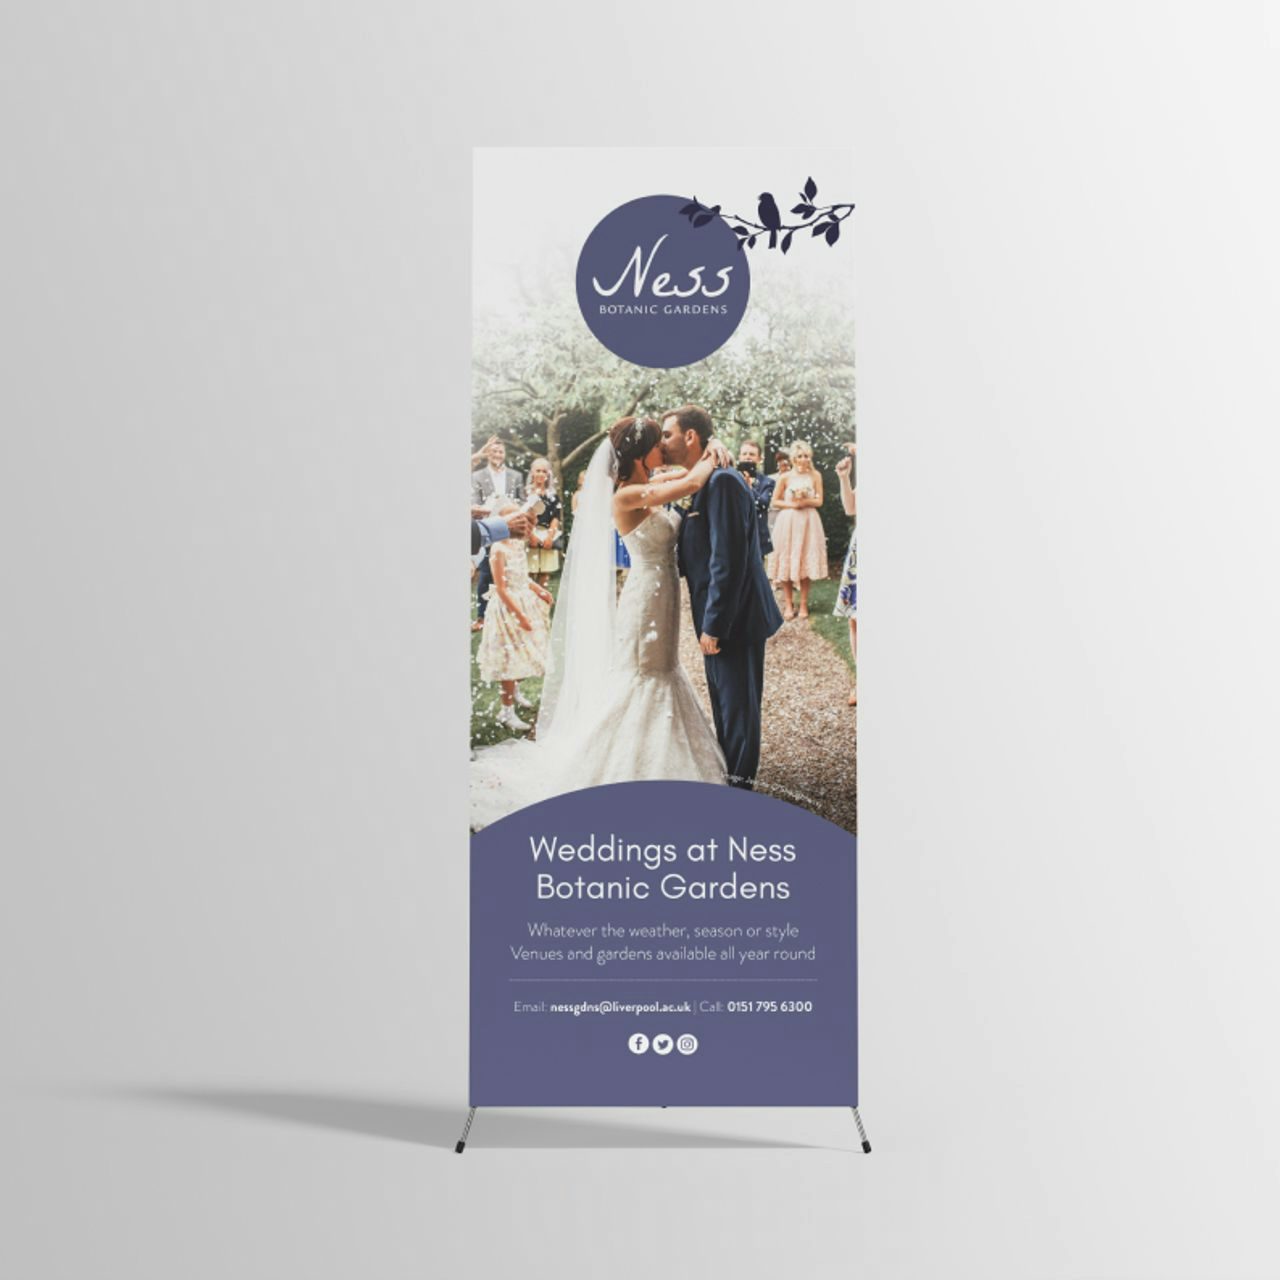 Promotional roll-up banner for Ness Botanic Gardens featuring a bride and groom, on a white background.